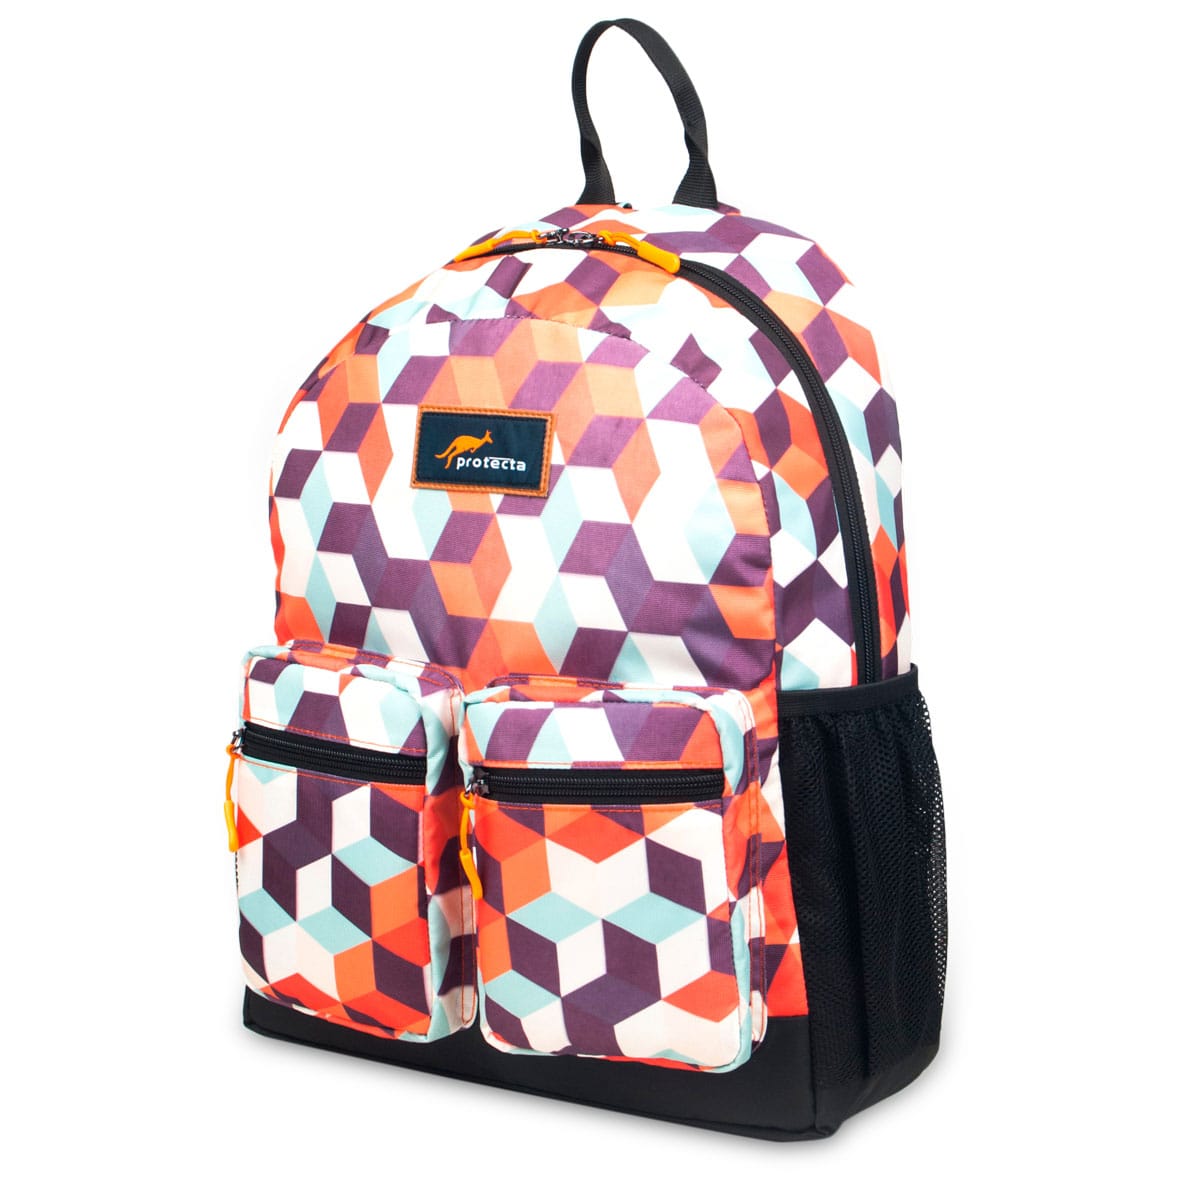 Building Blocks, Protecta Mystere Casual Backpack-2